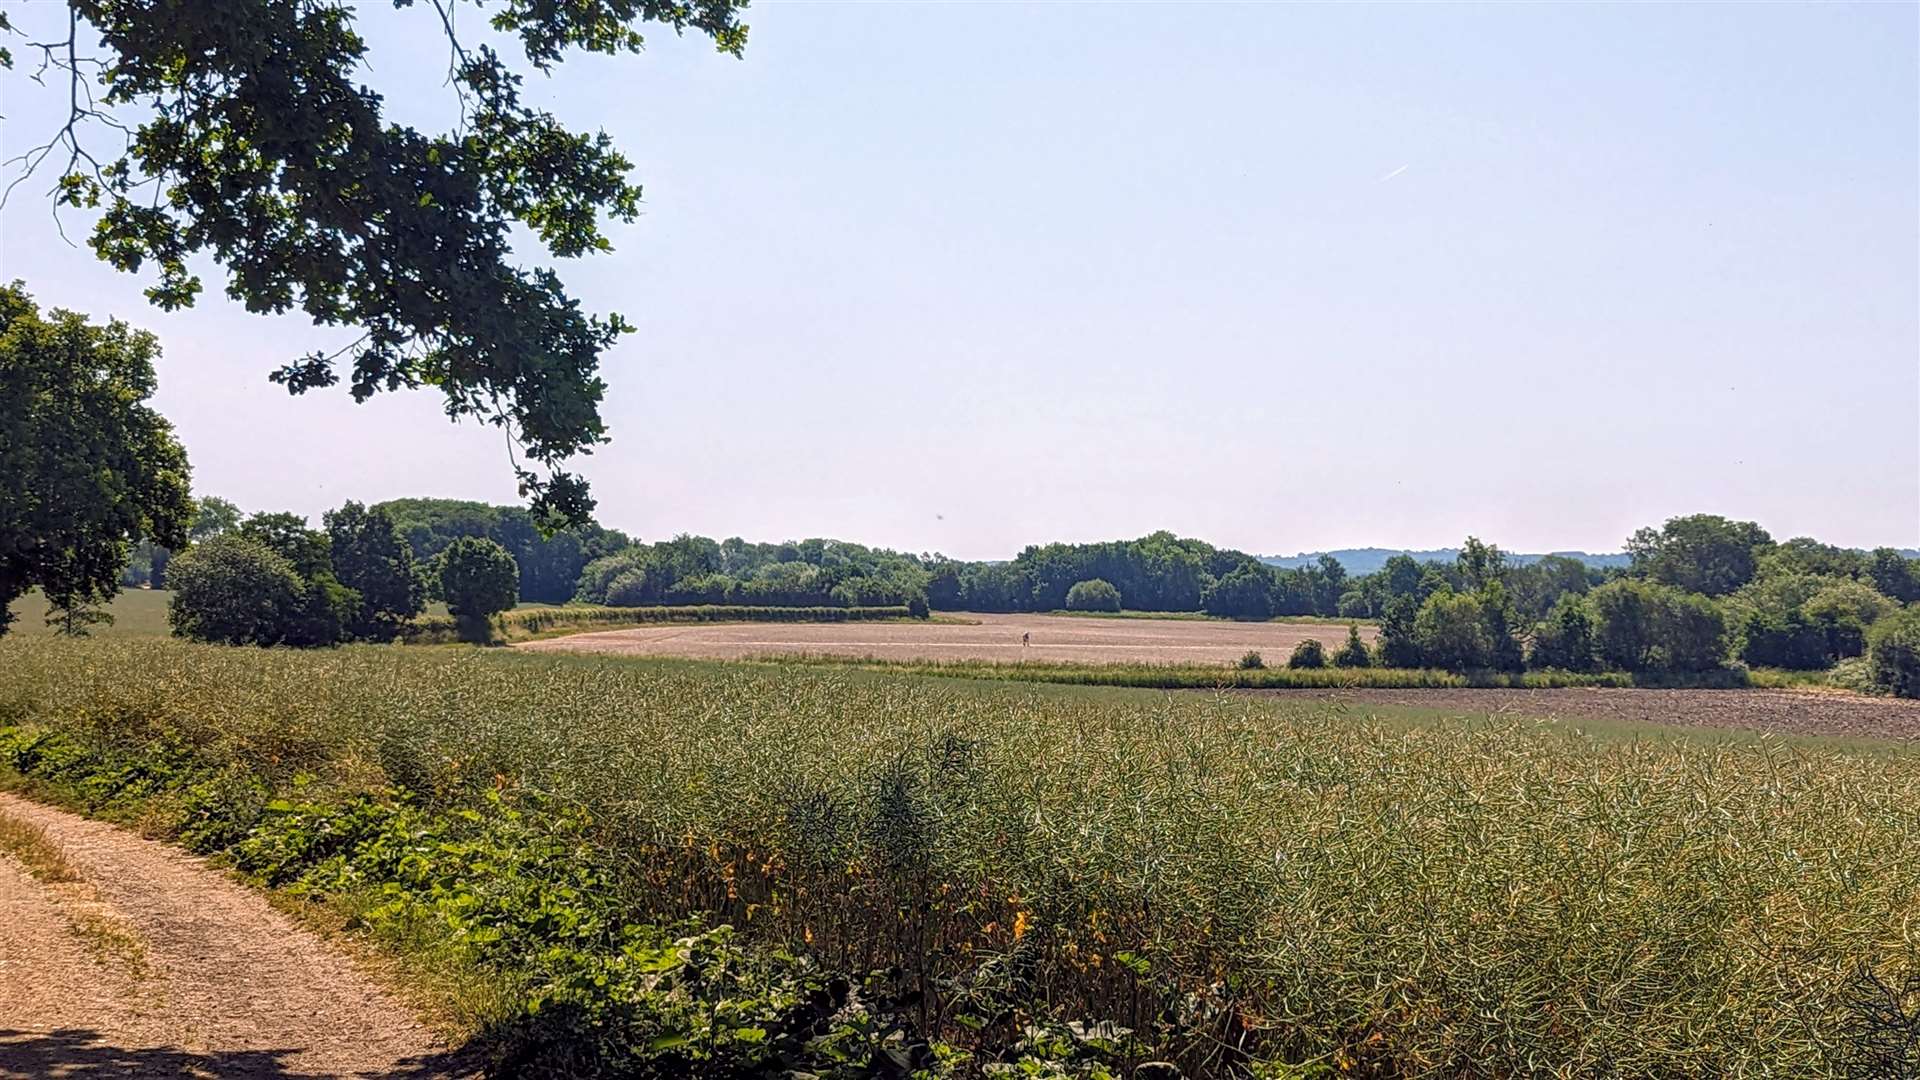 The walk enjoys great views out across the Kent countryside